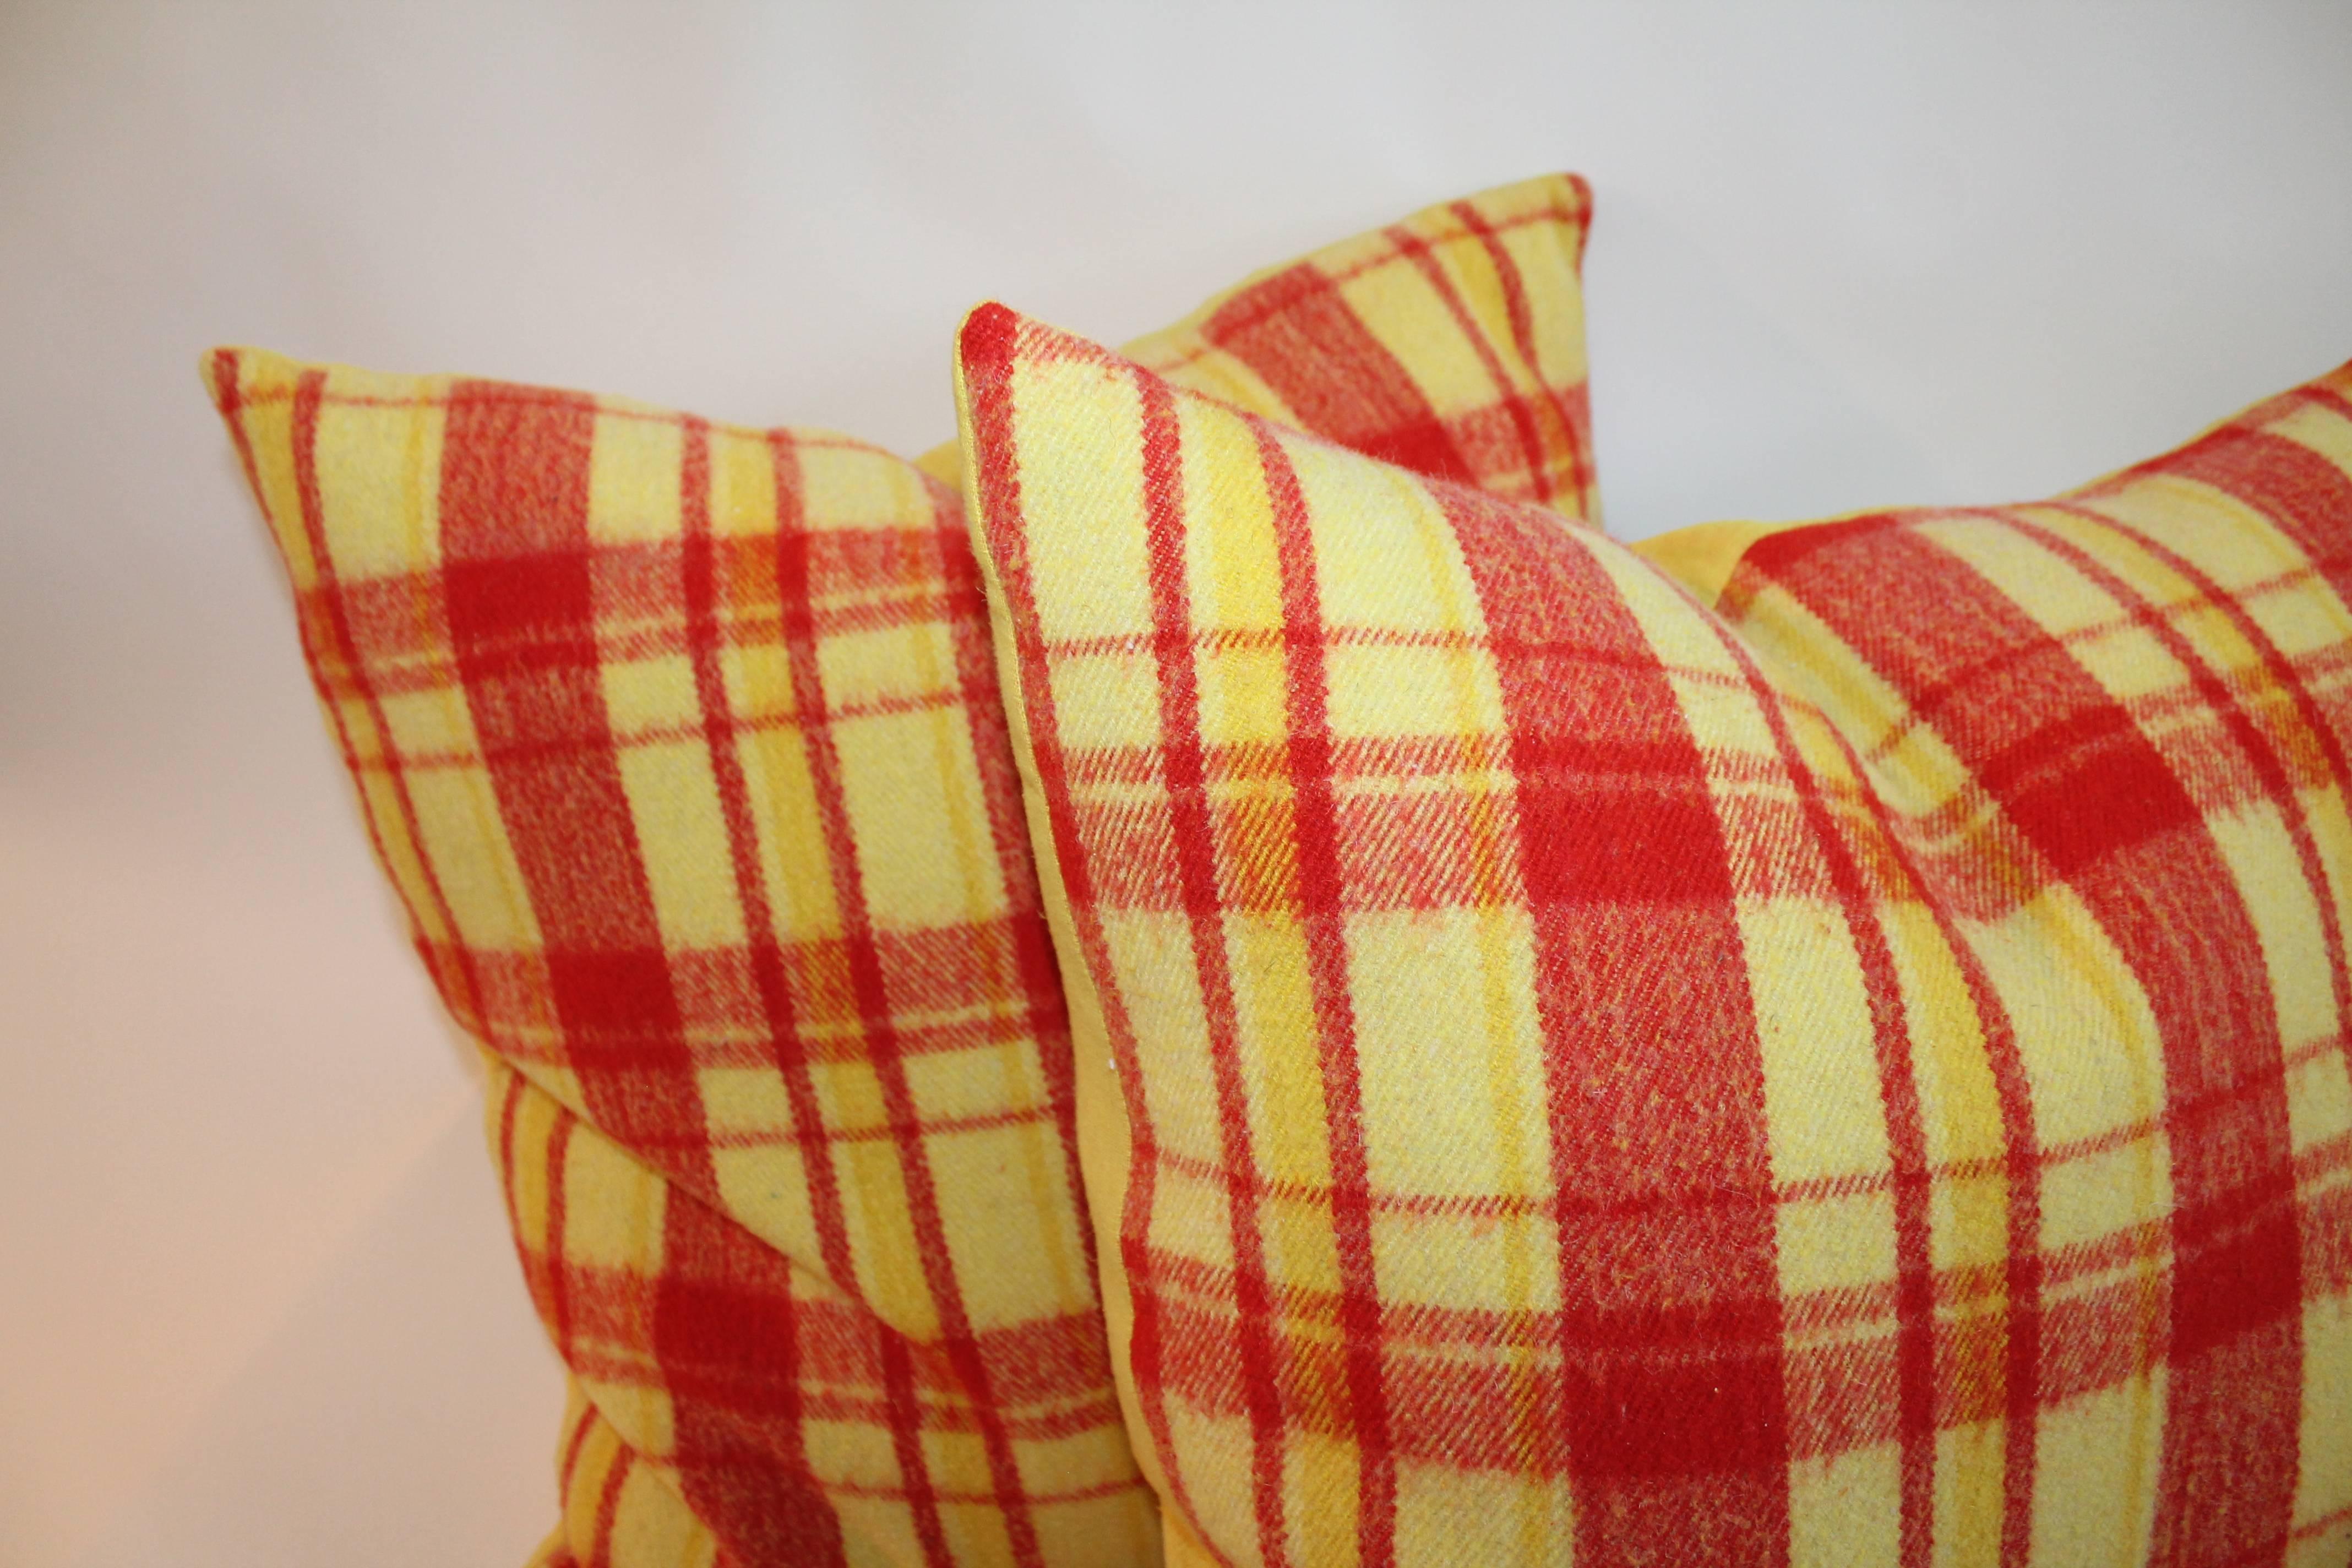 These funky and vibrant plaid wool horse blanket pillows have yellow cotton backing. Wonderful vintage colors.